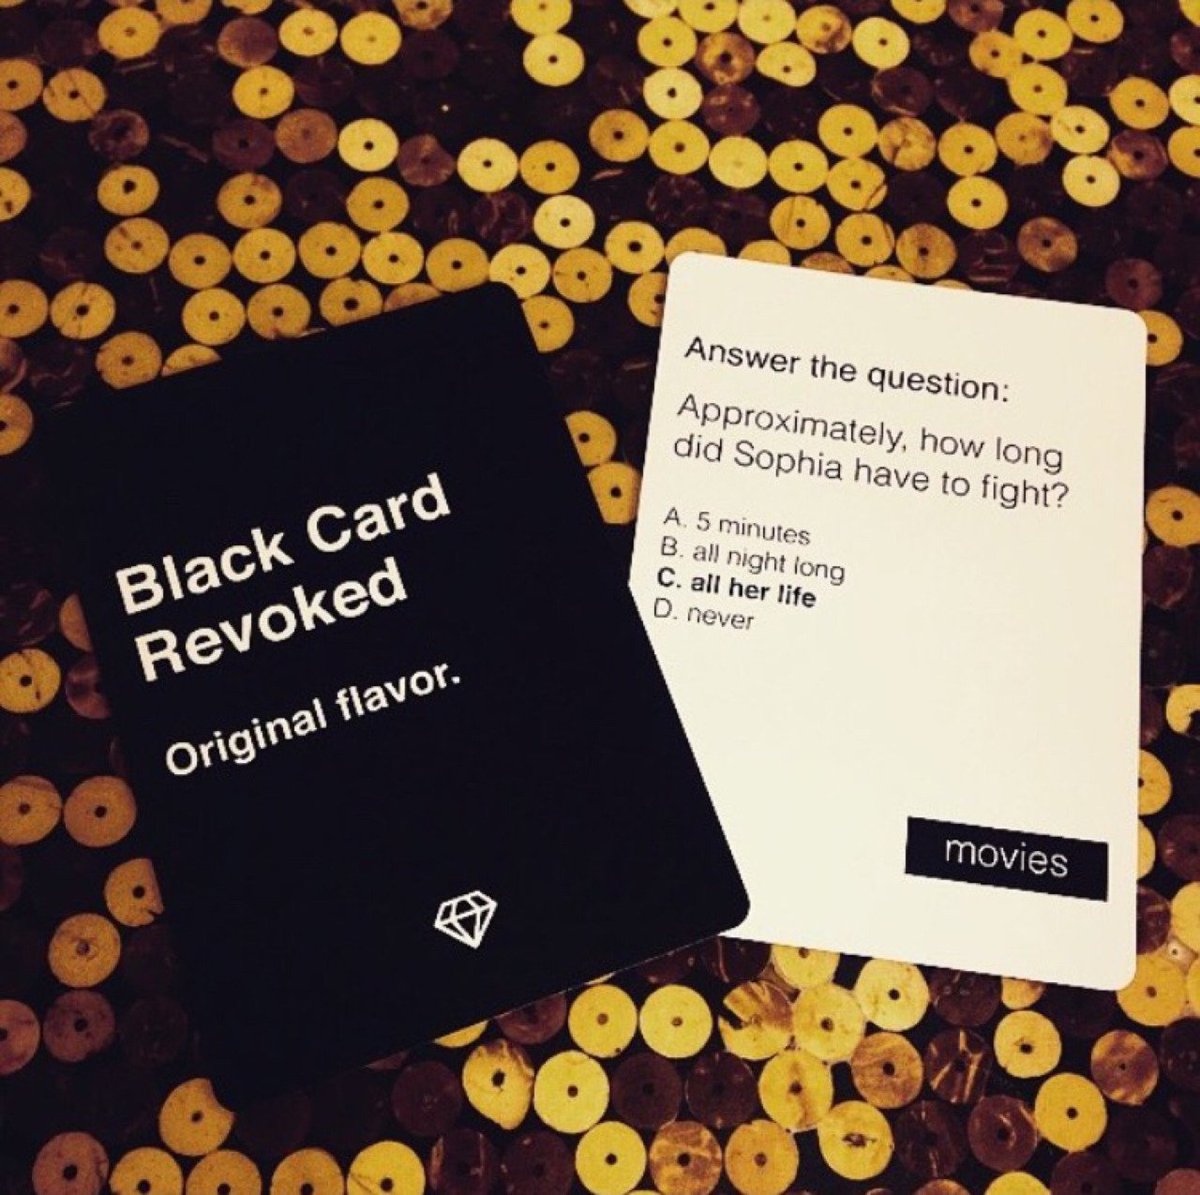 Black card revoked questions and answers